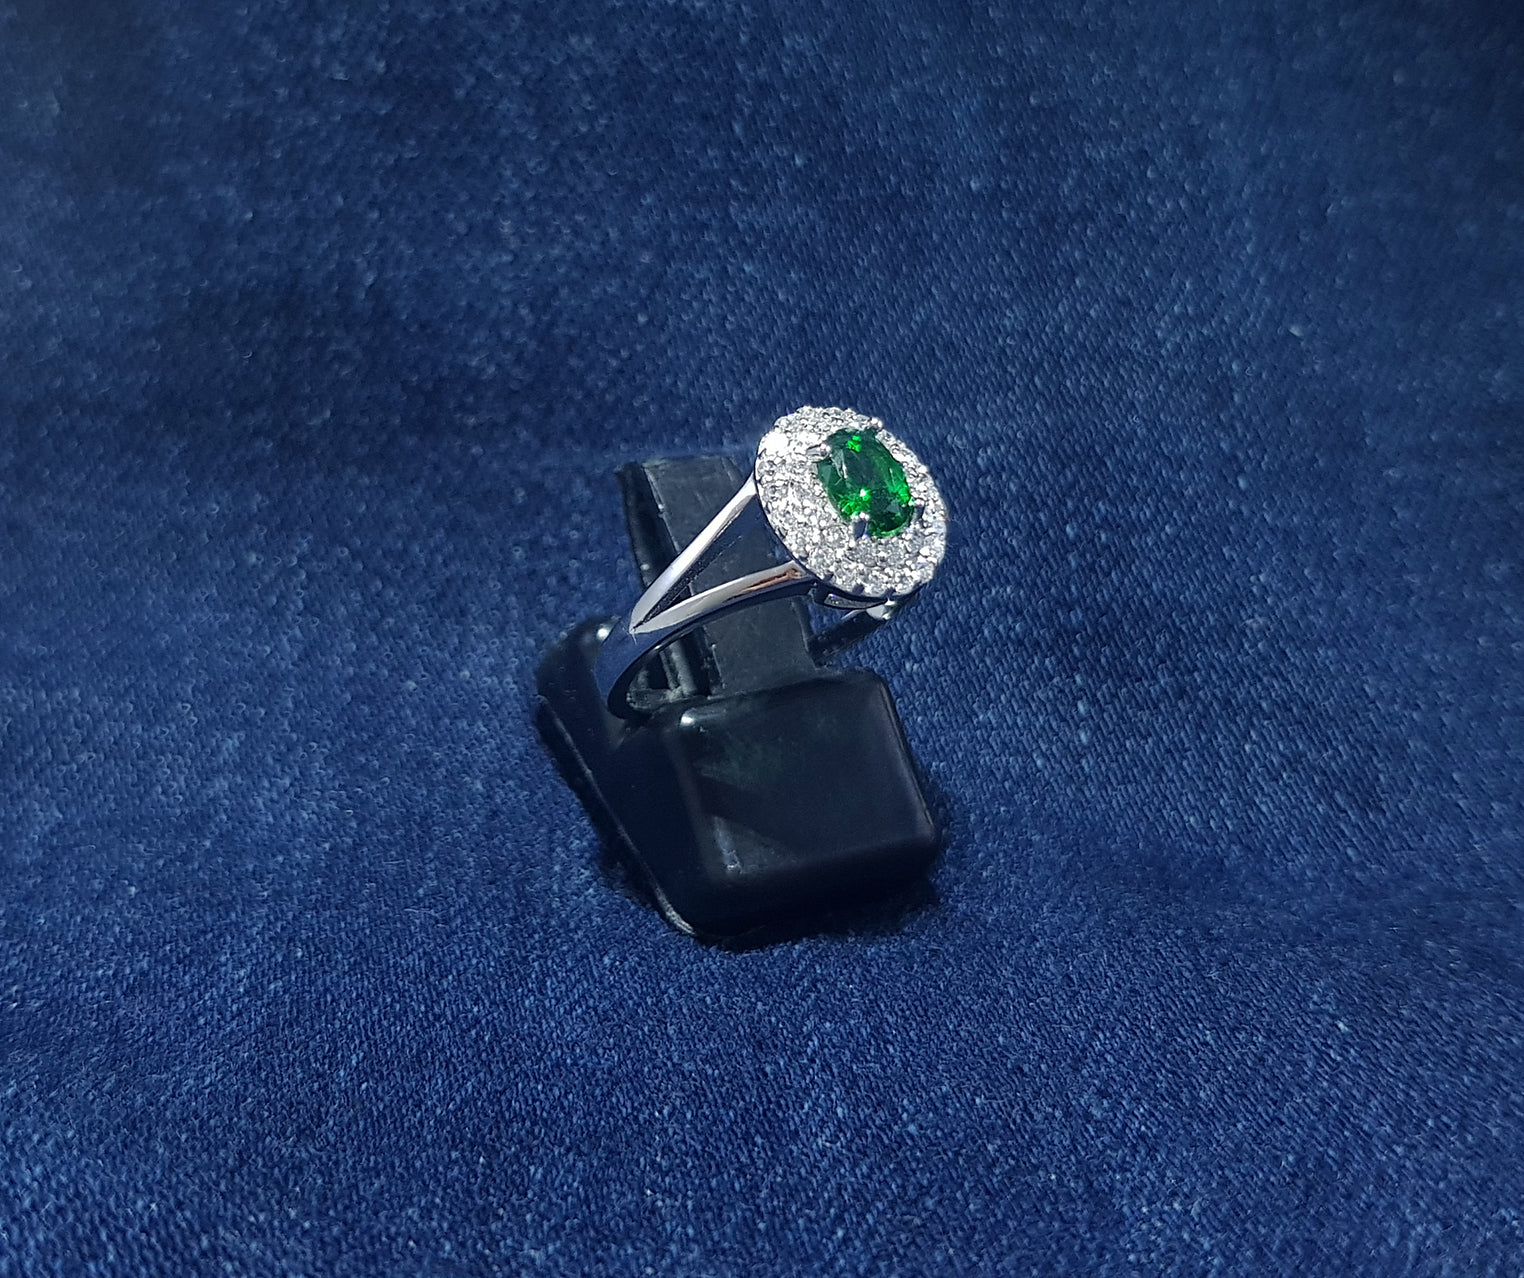 Sterling Silver Ring with Cubic Zirconia Stones -  Green Central Cubic  